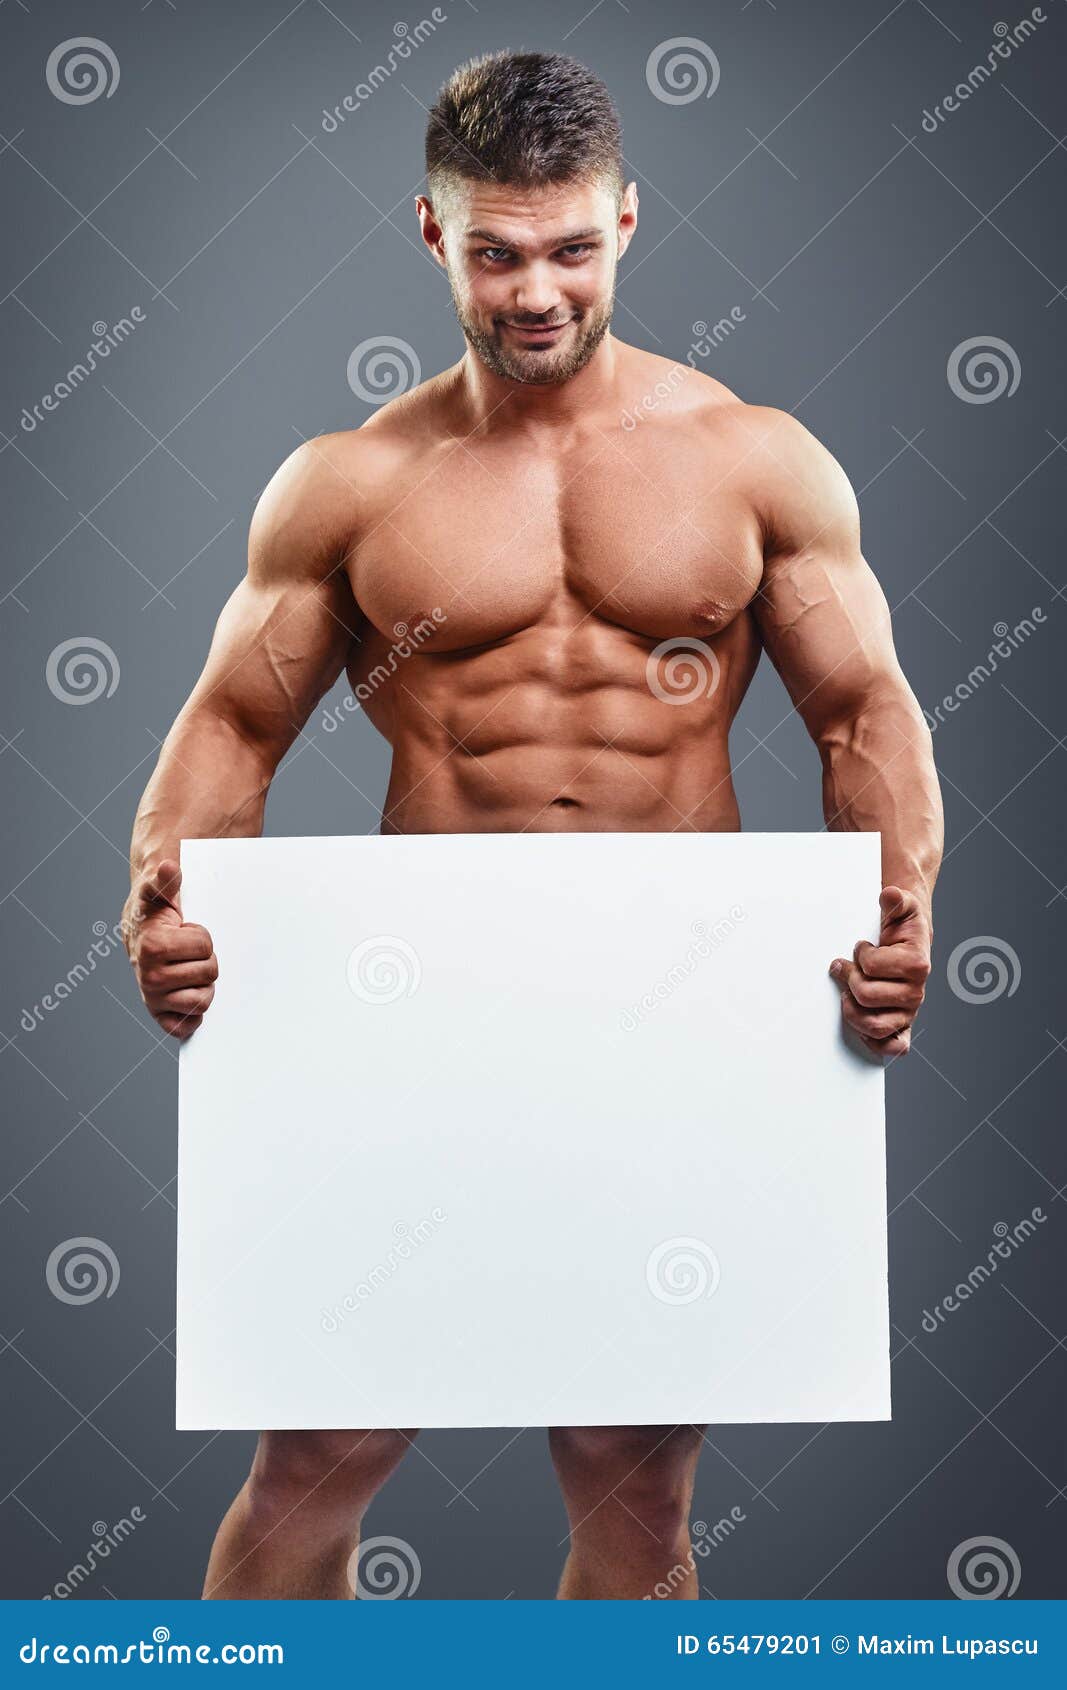 Handsome Man With Muscular Body Stock Image - Image of 